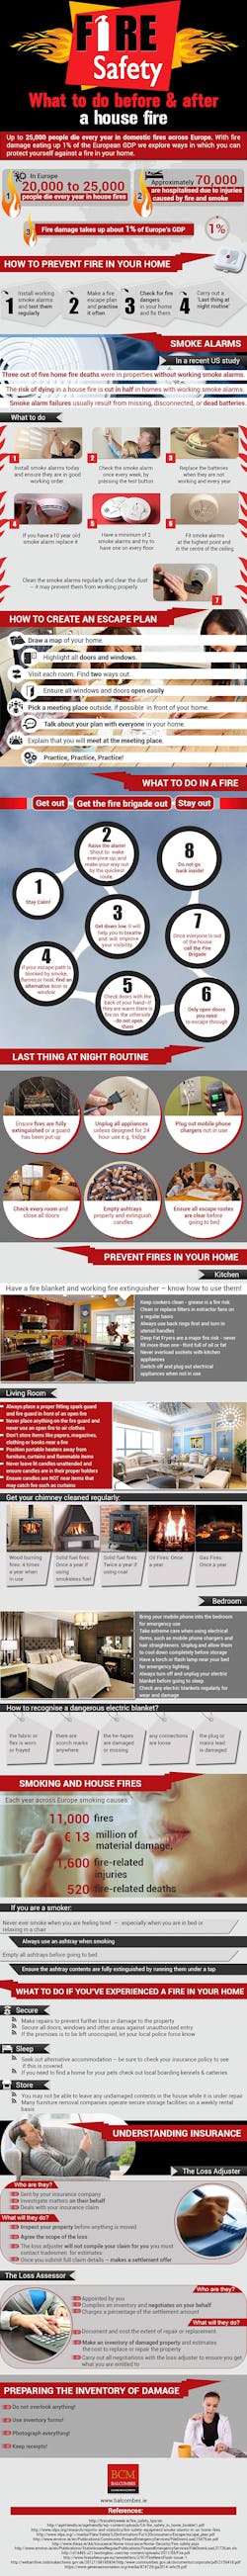 Ehstoday Com Sites Ehstoday com Files Uploads 2014 09 Fire Safety In The Home Infographic 0